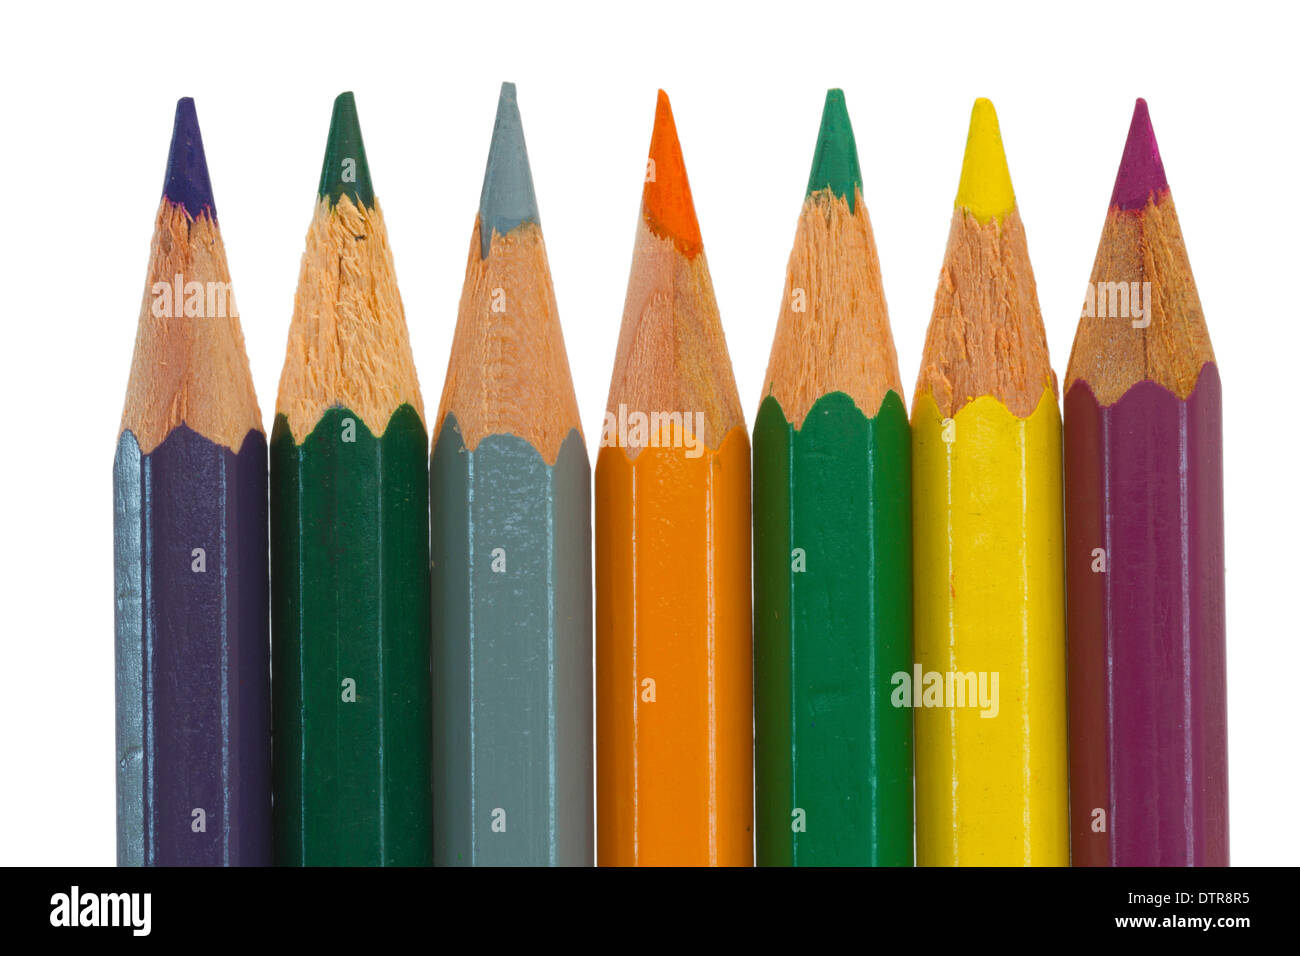 47,700+ Colored Pencils Stock Photos, Pictures & Royalty-Free